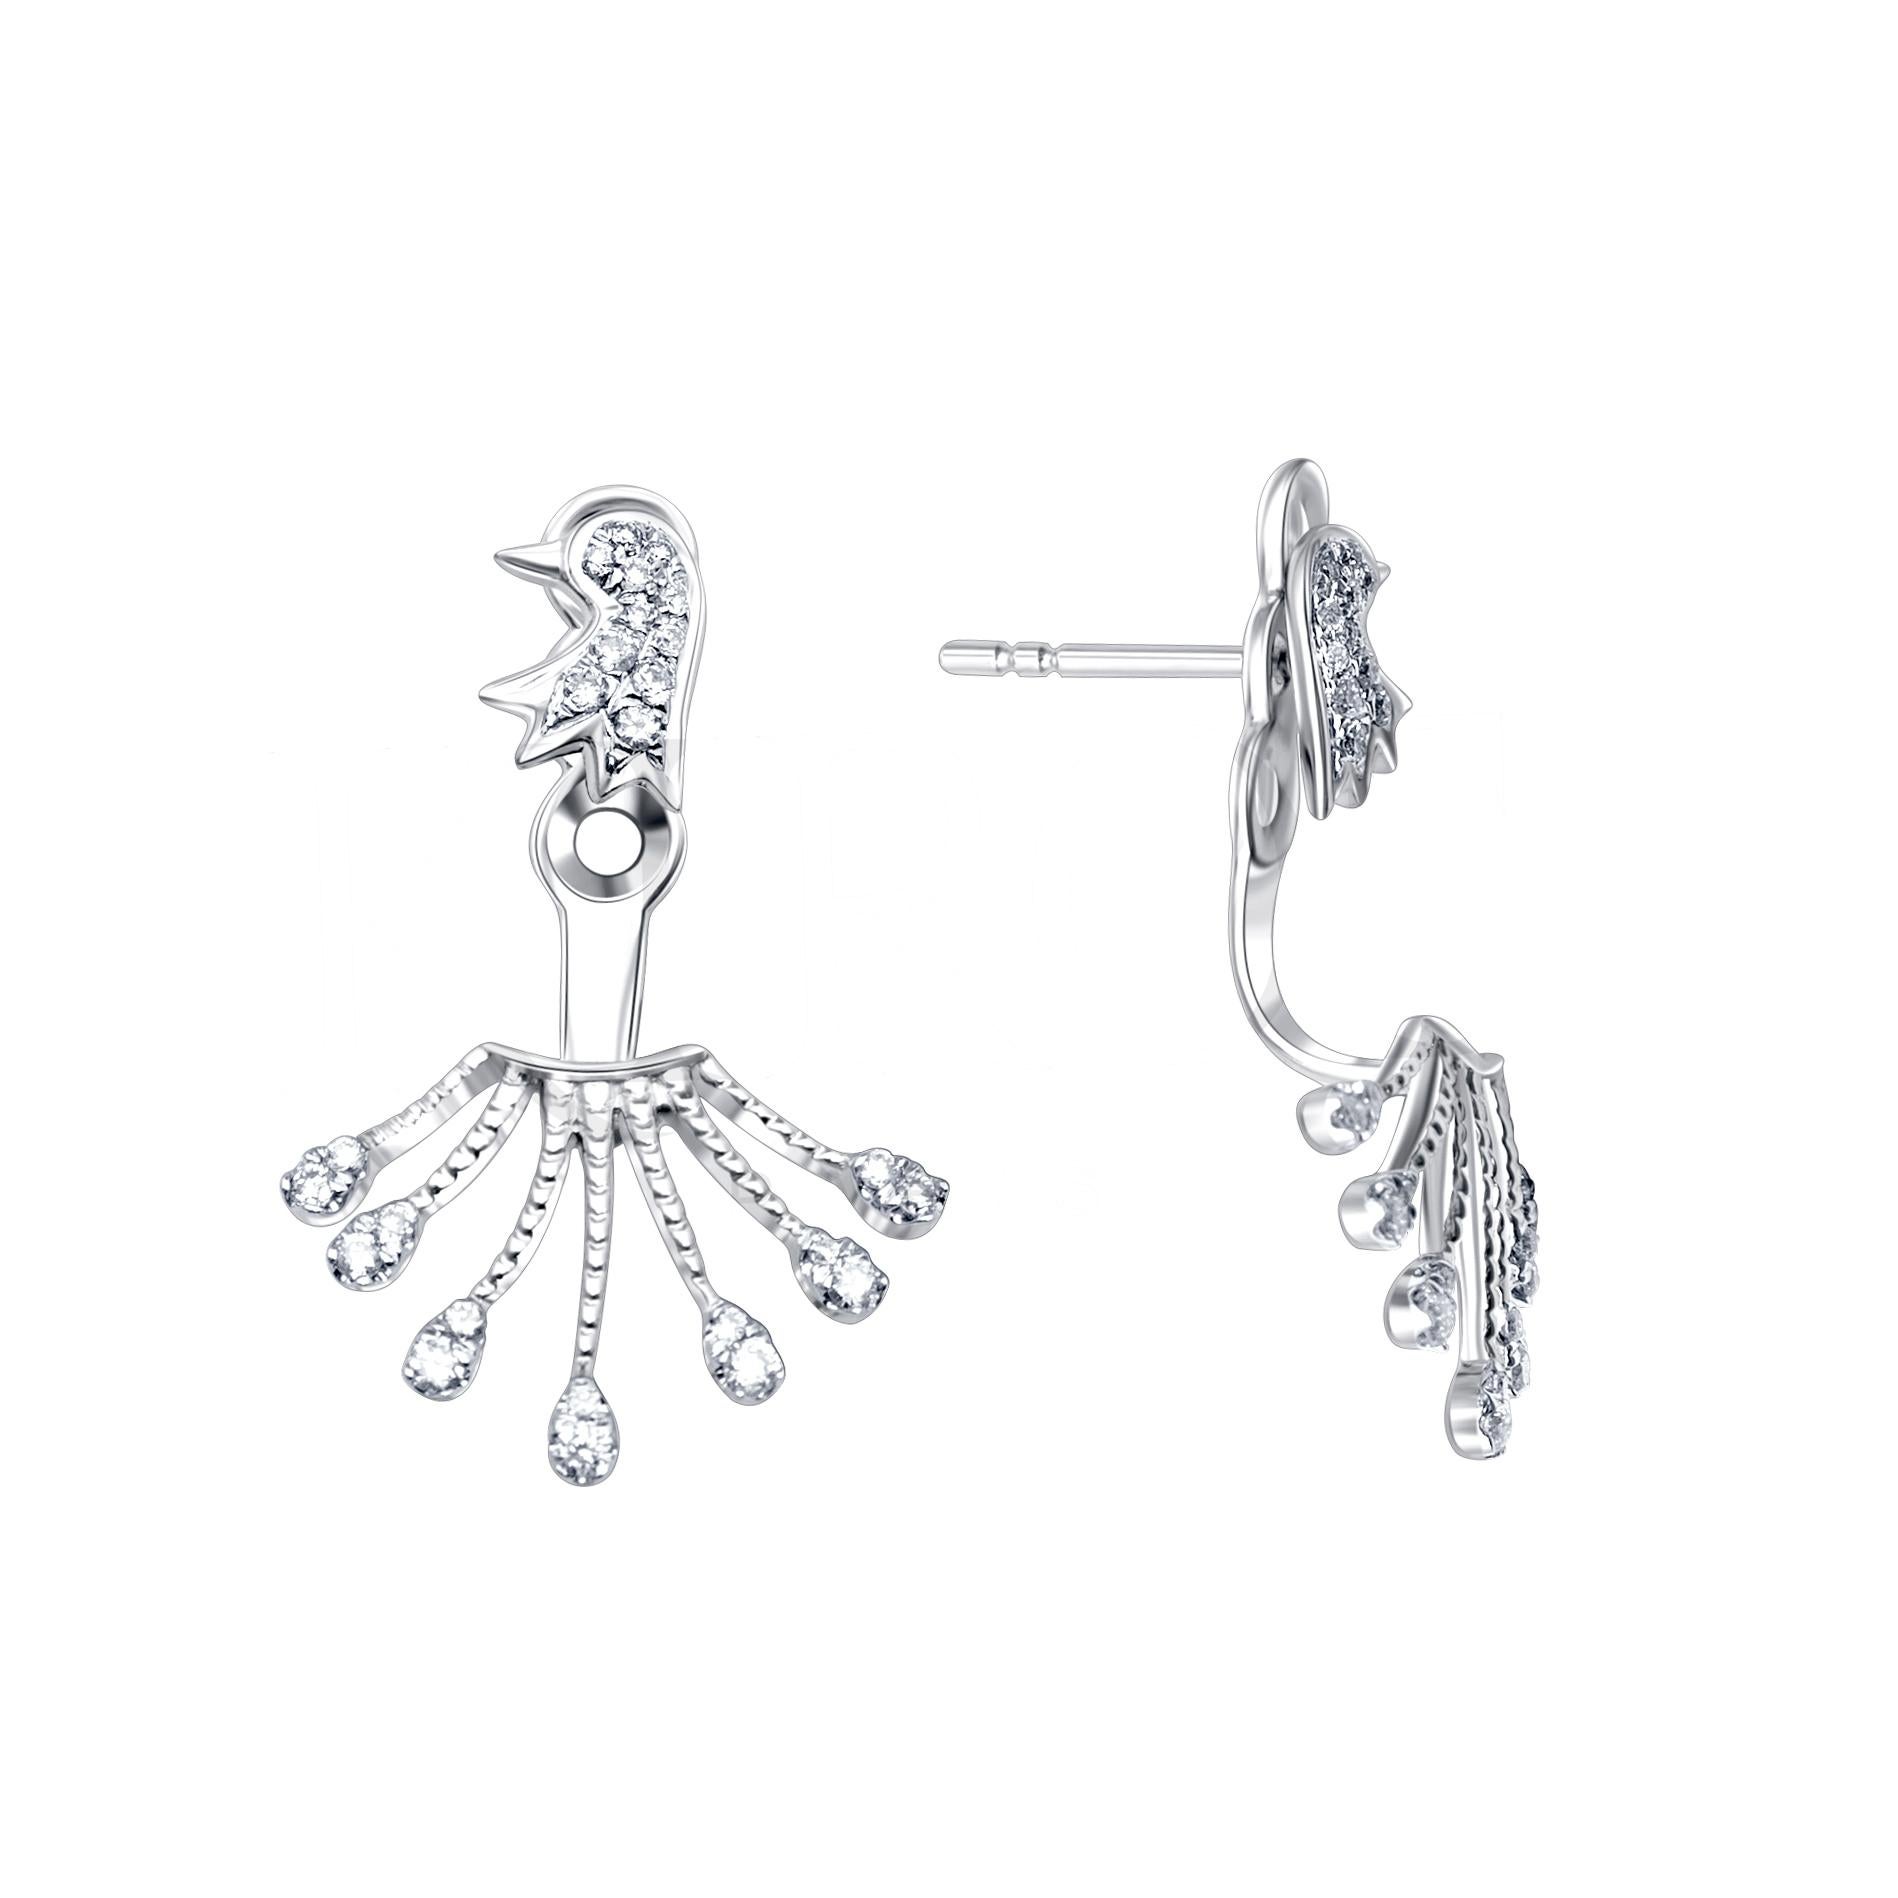 18 Karat White Gold And Diamond Earrings

Diamonds of approximately 0.31 carats mounted on 18 karat white gold earring. The earring weighs approximately around 3.868 grams.

Please note: The charges specified do not include any shipment, VAT, DUTY,